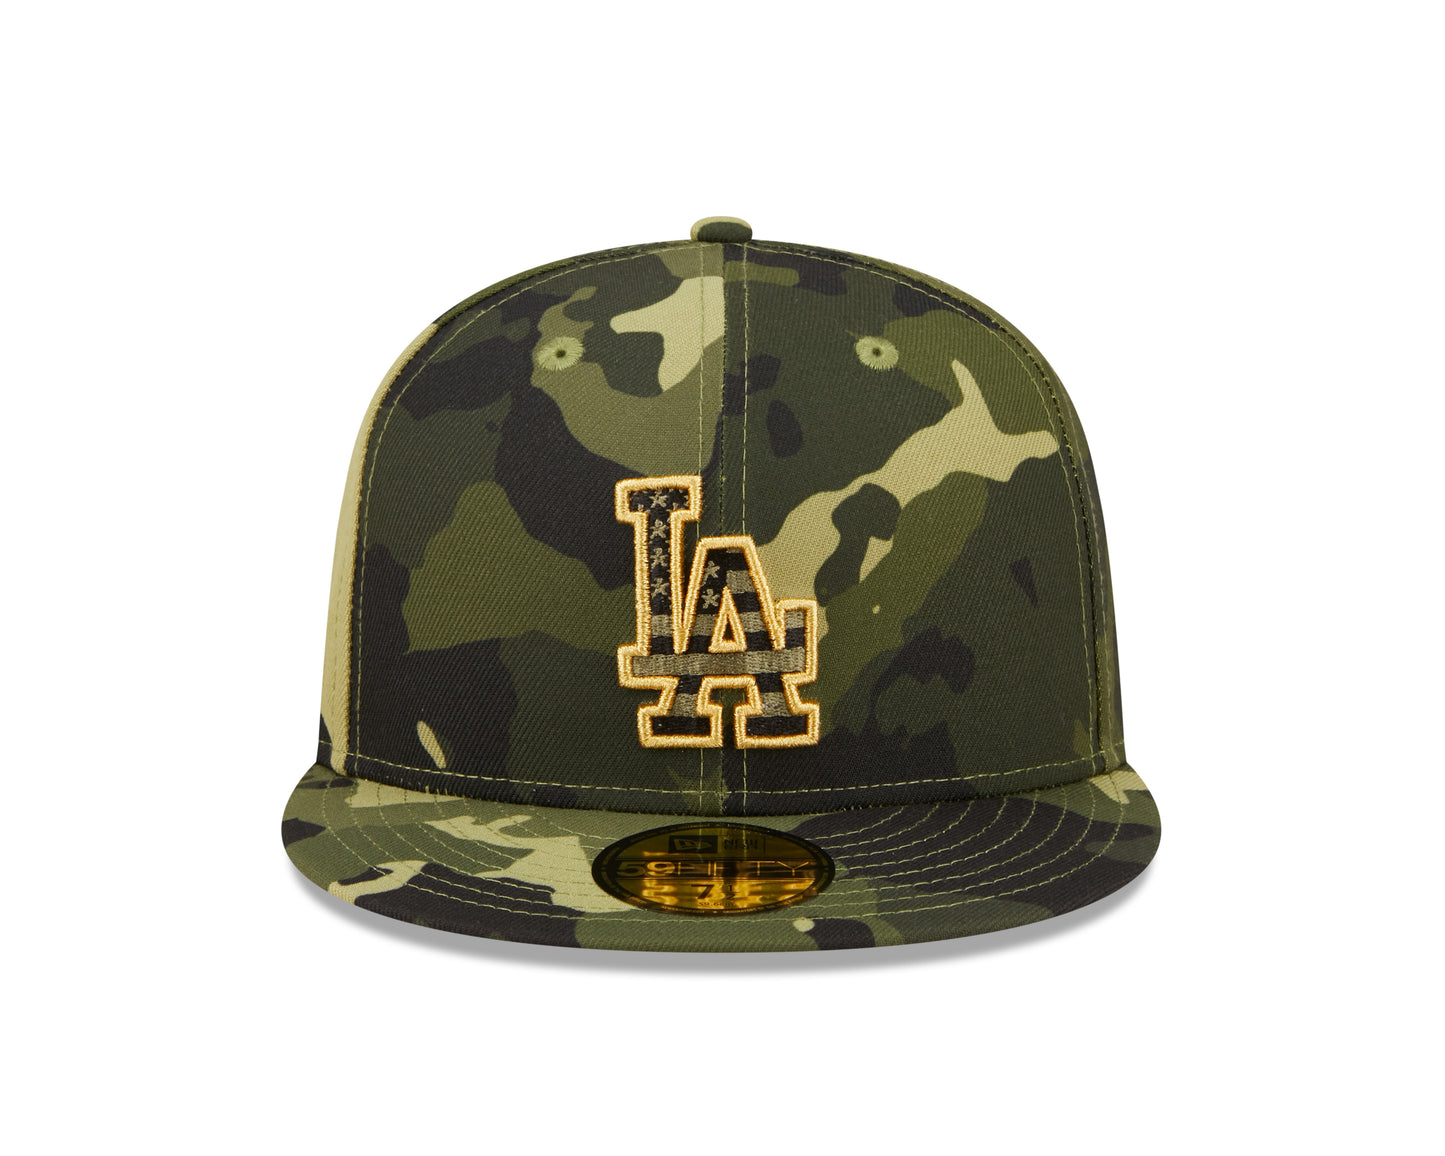 Los Angeles Dodgers New Era Camo Armed Forces On-Field 59FIFTY Fitted Hat